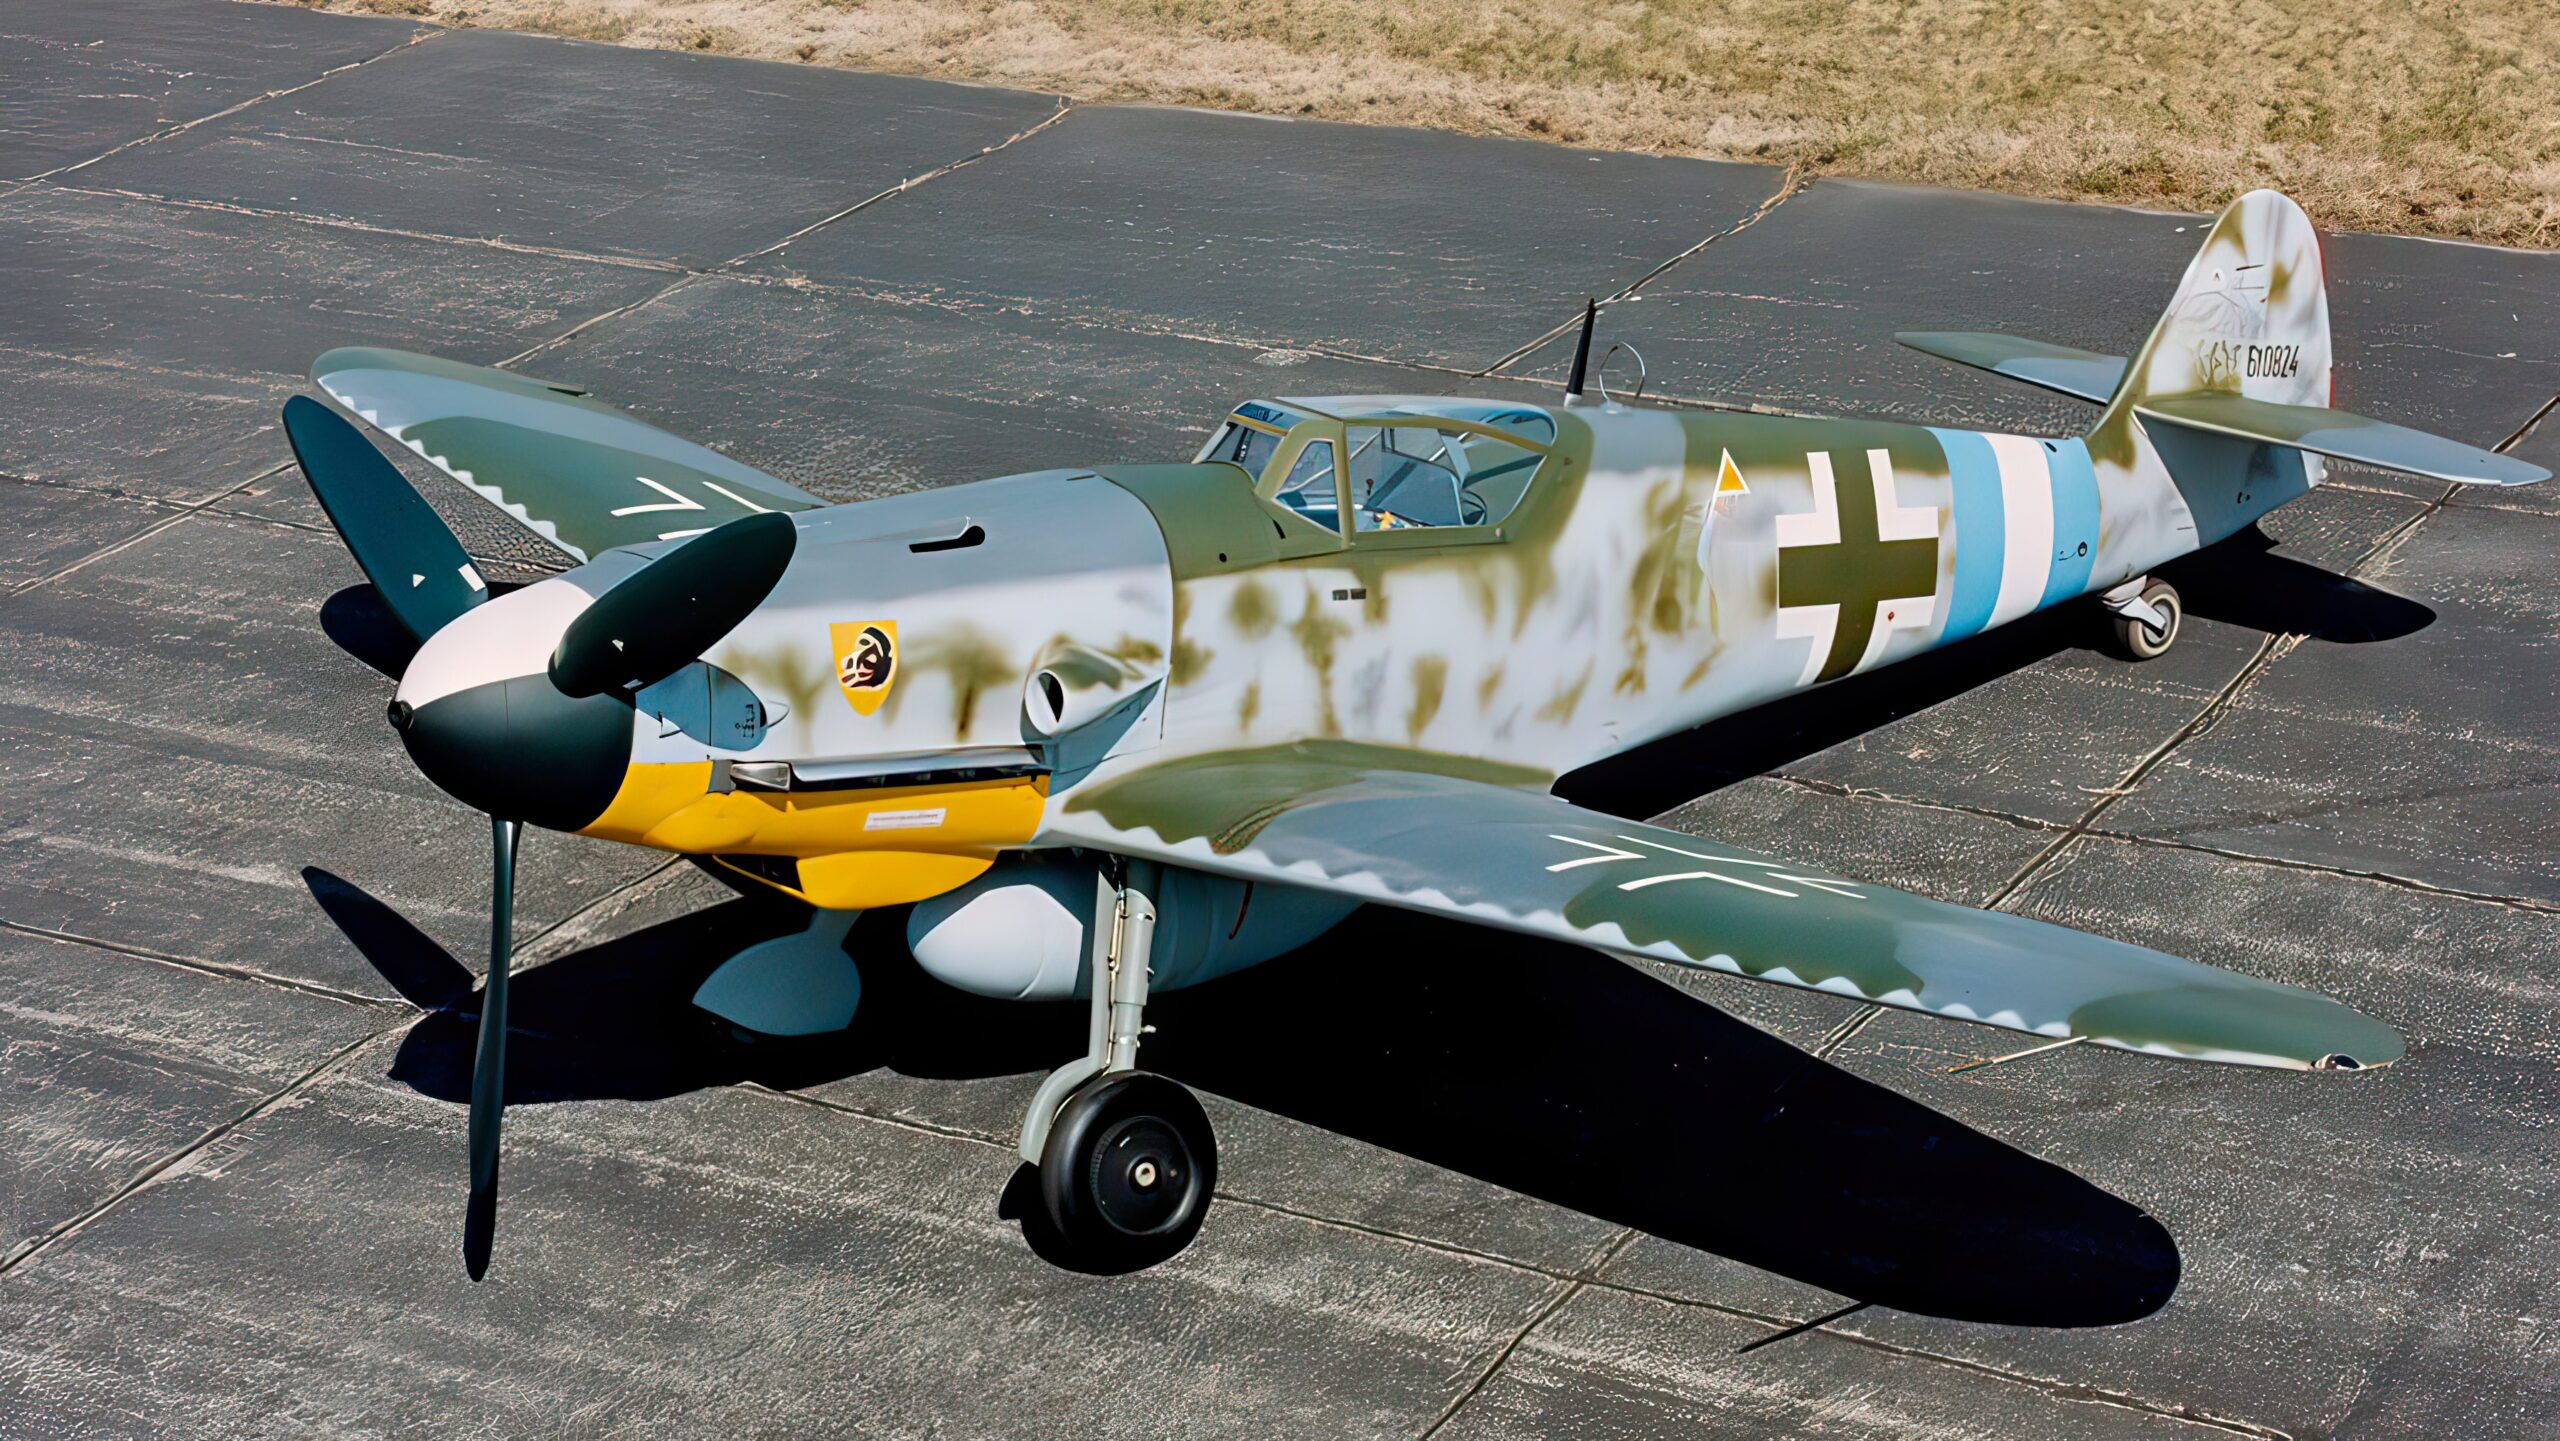 DAYTON, Ohio -- Messerschmitt Bf 109G-10 at the National Museum of the United States Air Force. (U.S. Air Force photo)